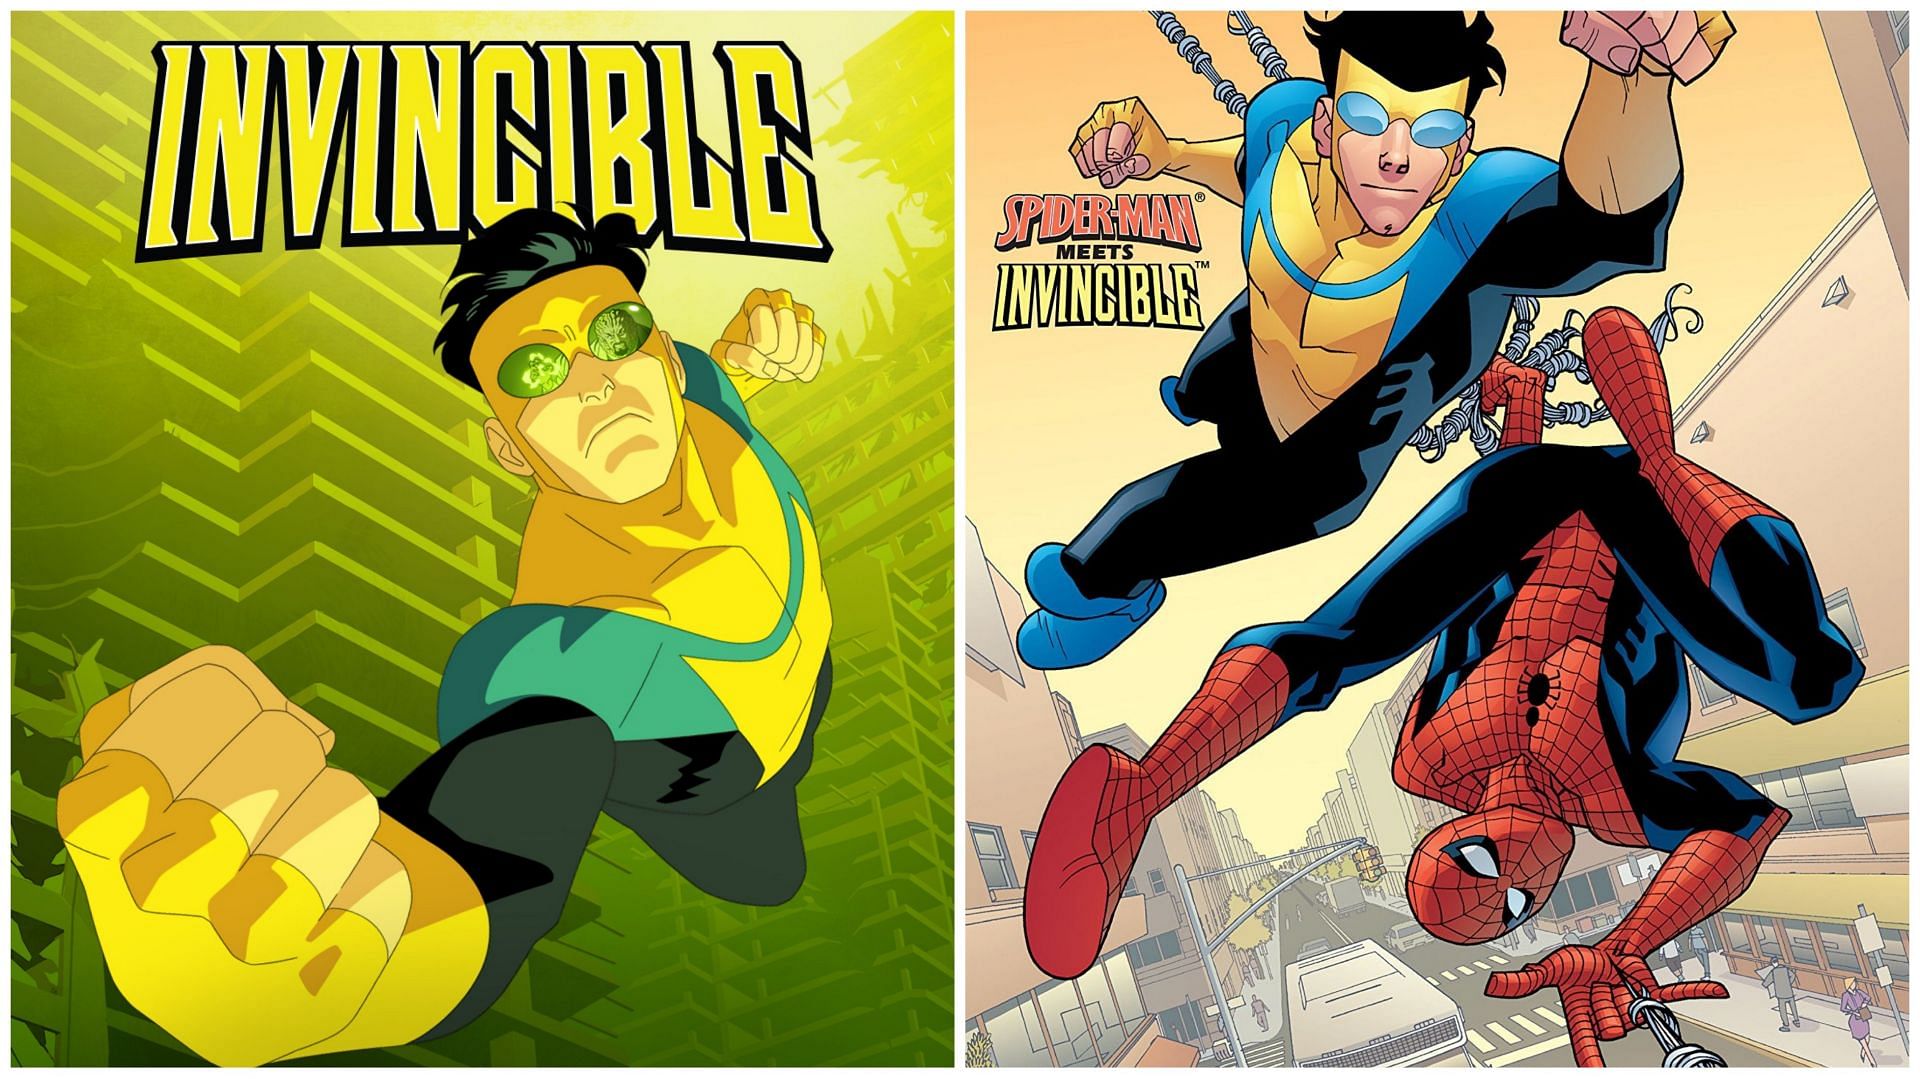 Poster for Invincible Season 2 Part 2 and Marvel Team-Up #14 (Image via @InvincibleHQ on X and Marvel Comics)